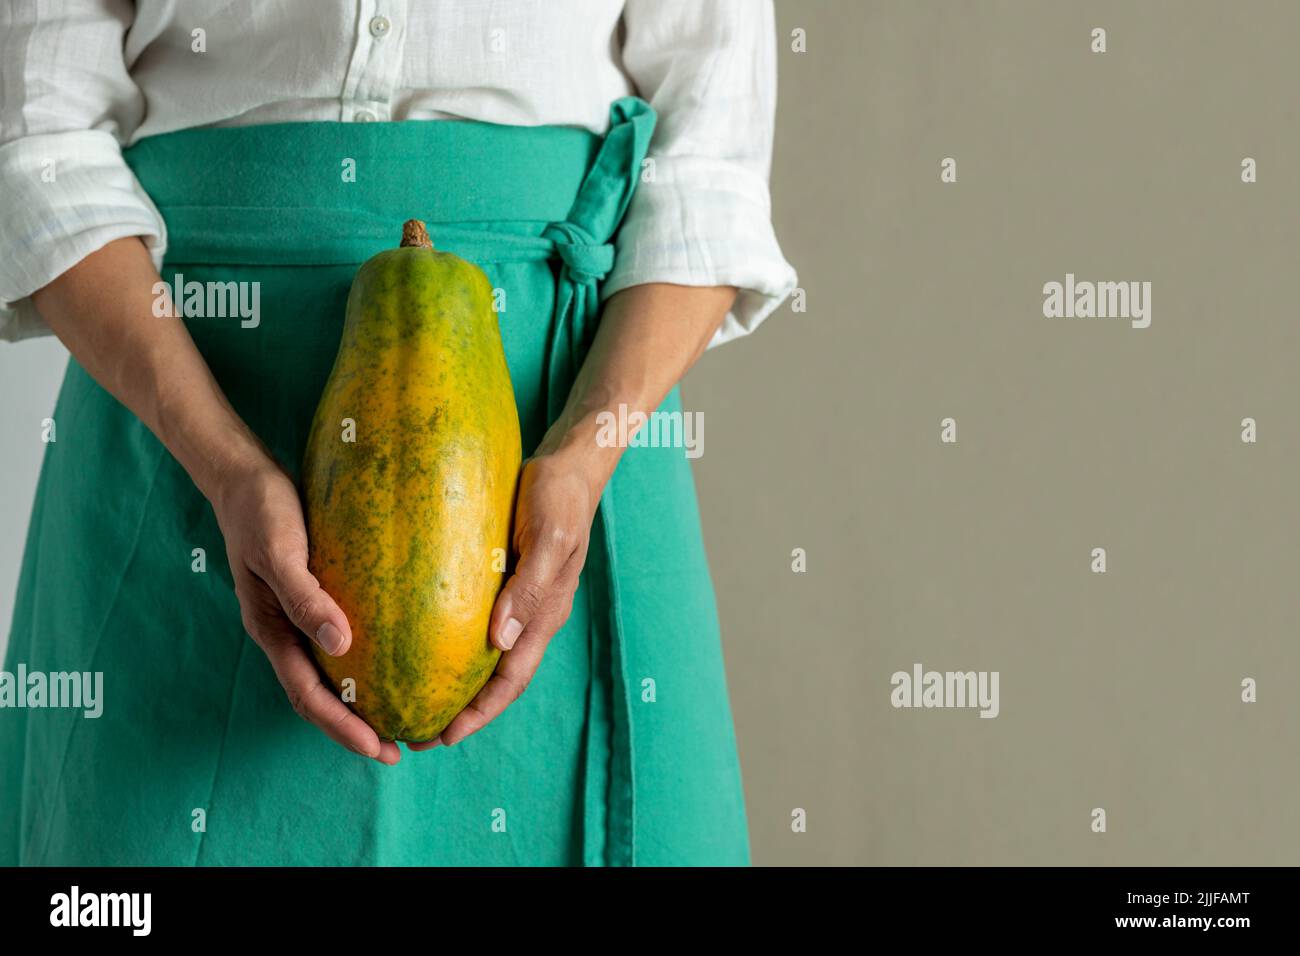 Close-up of a woman holding a papaya against plain background - stock photo Stock Photo